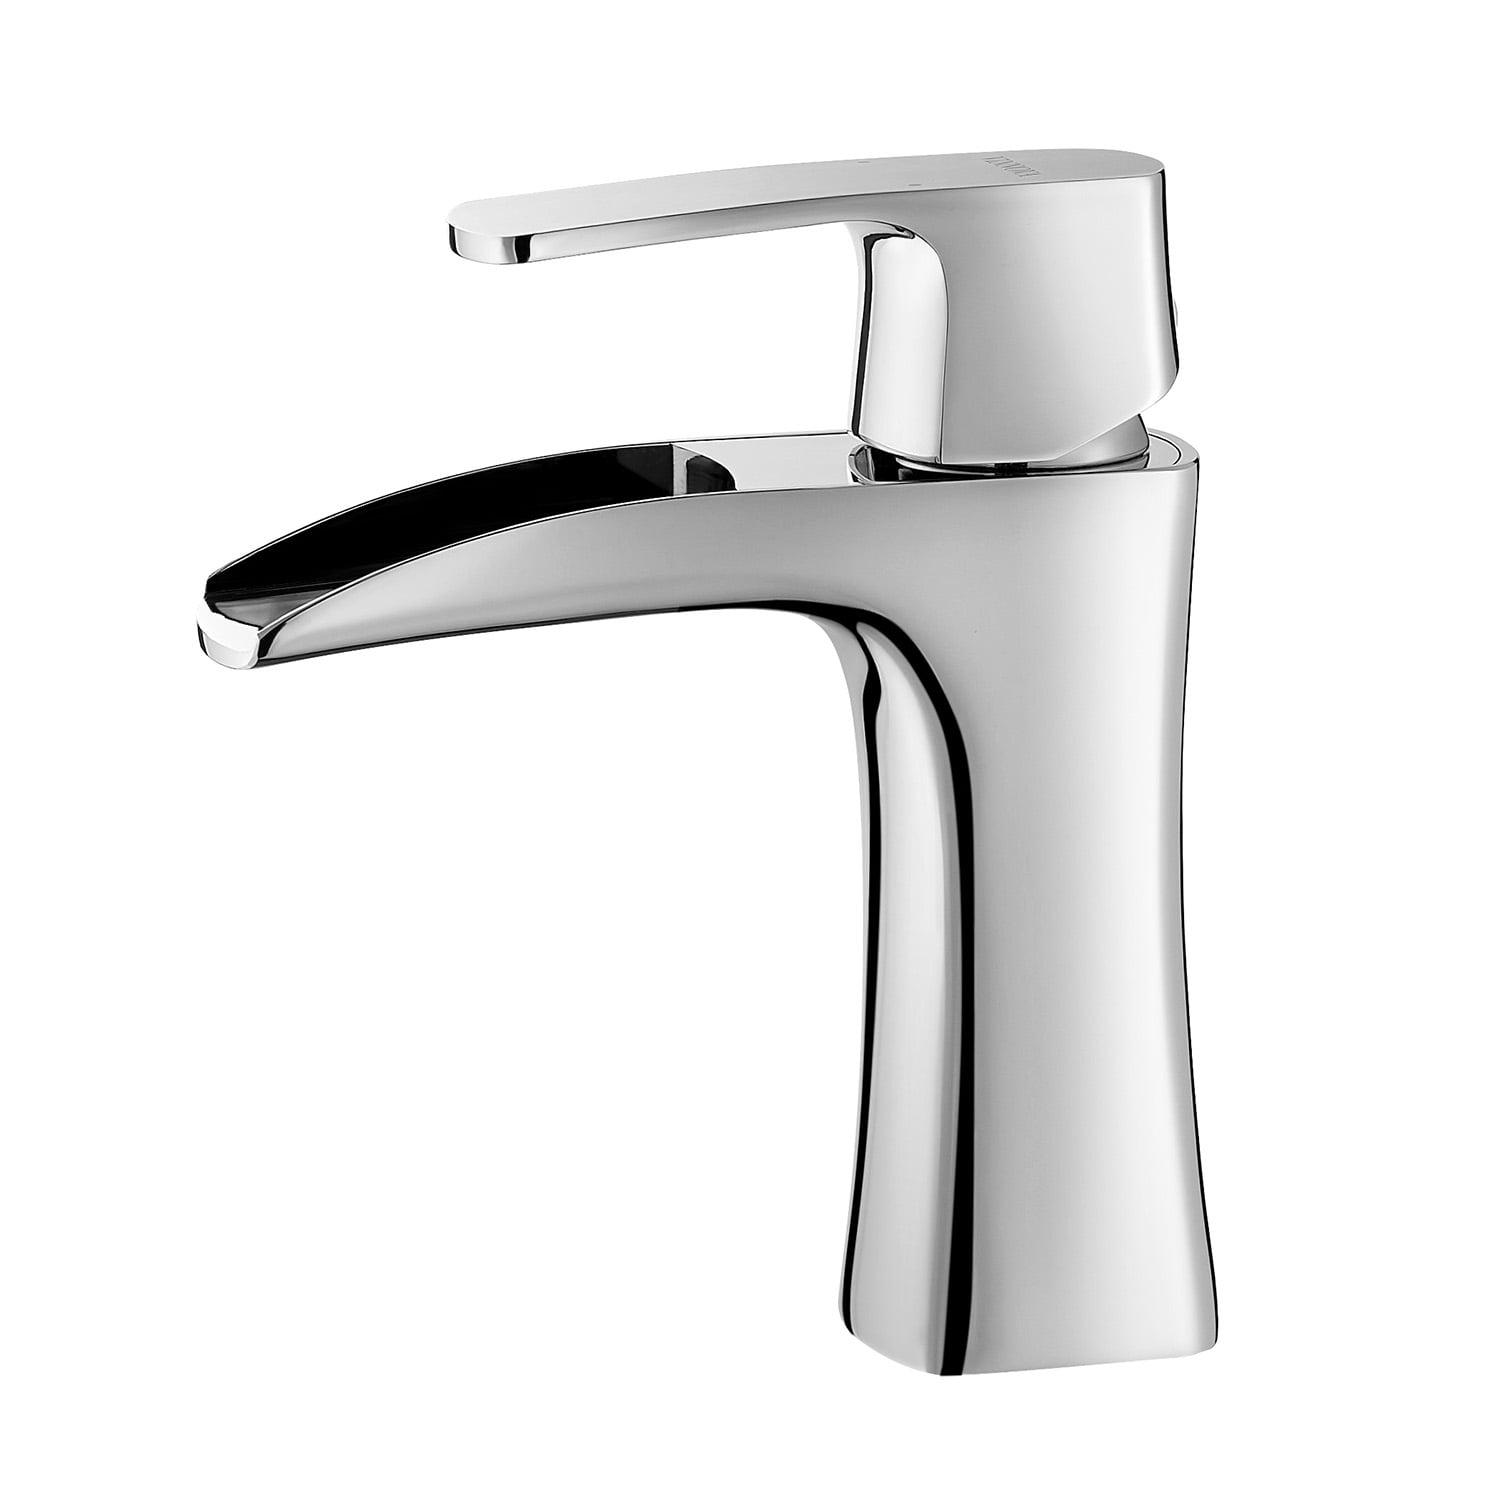 Alessandra Polished Chrome Waterfall Faucet with Solid Brass Construction